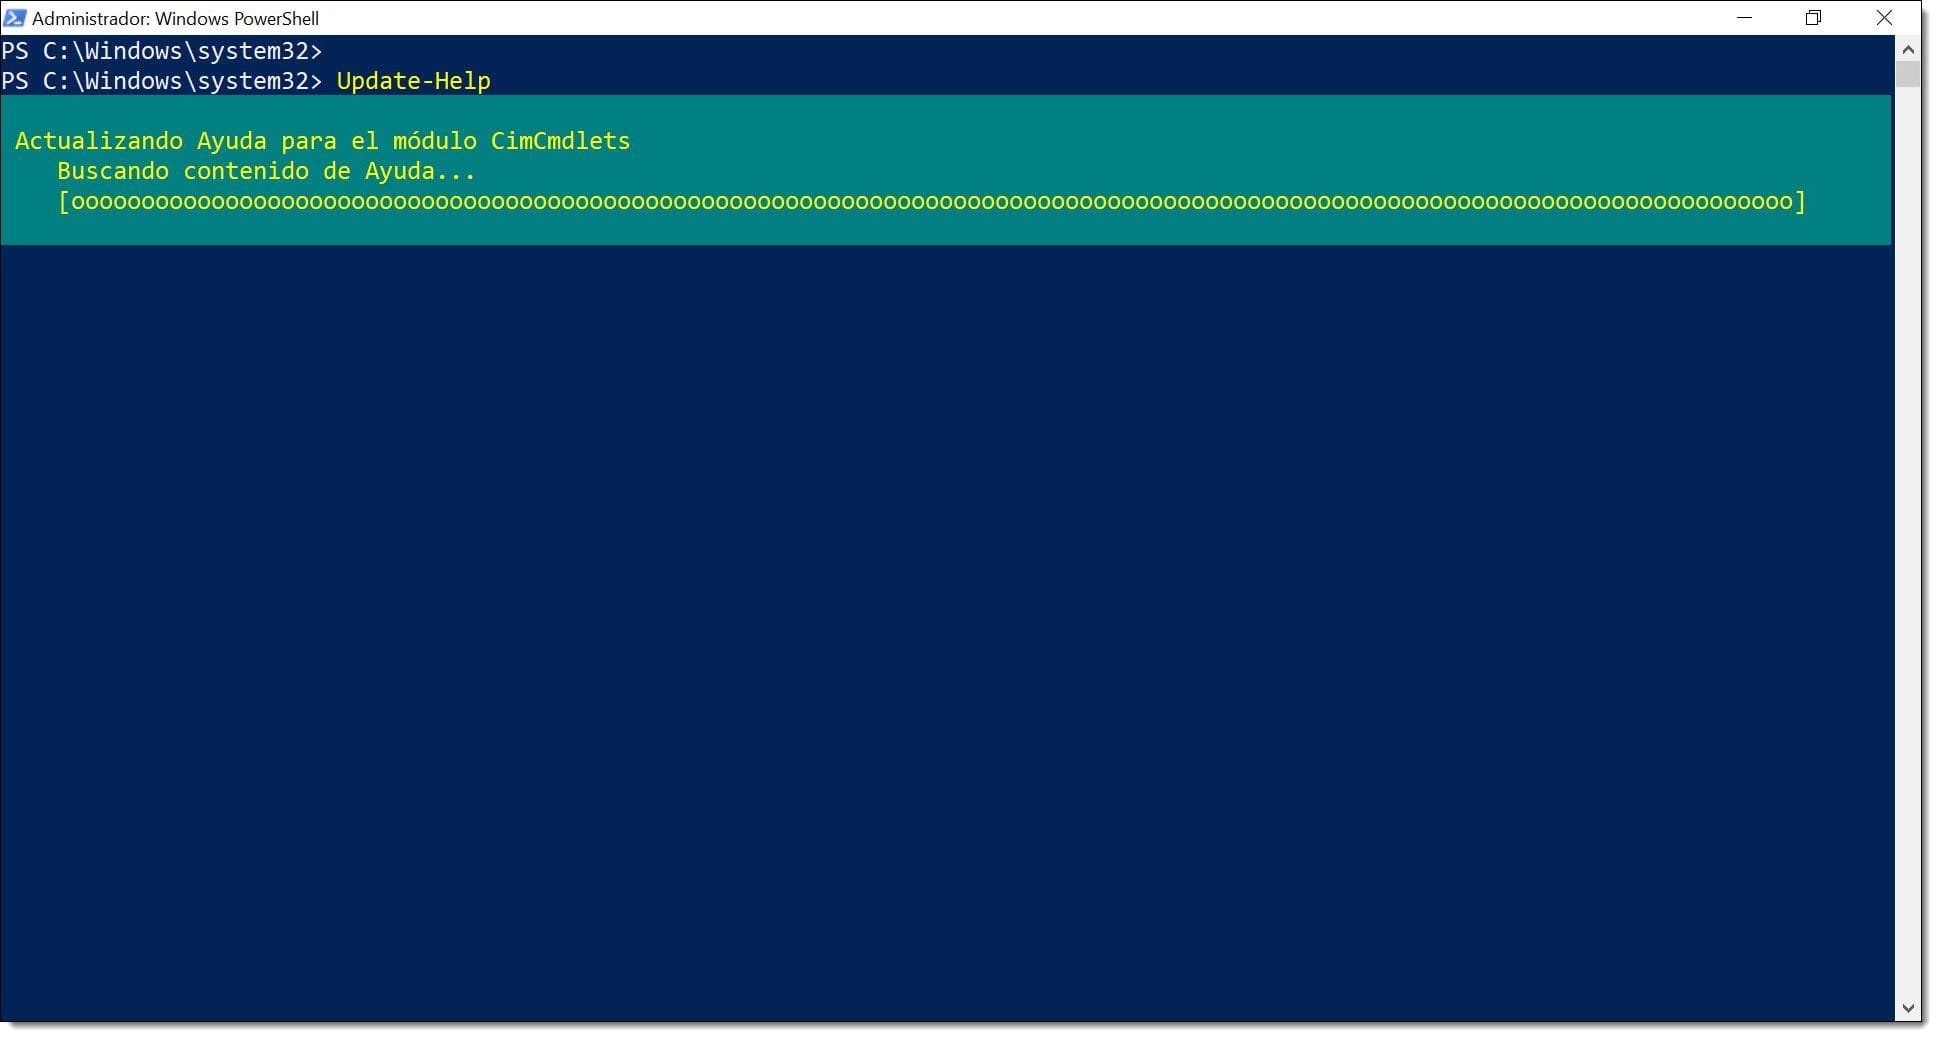 Image - Updating PowerShell help files using the Update-Help command